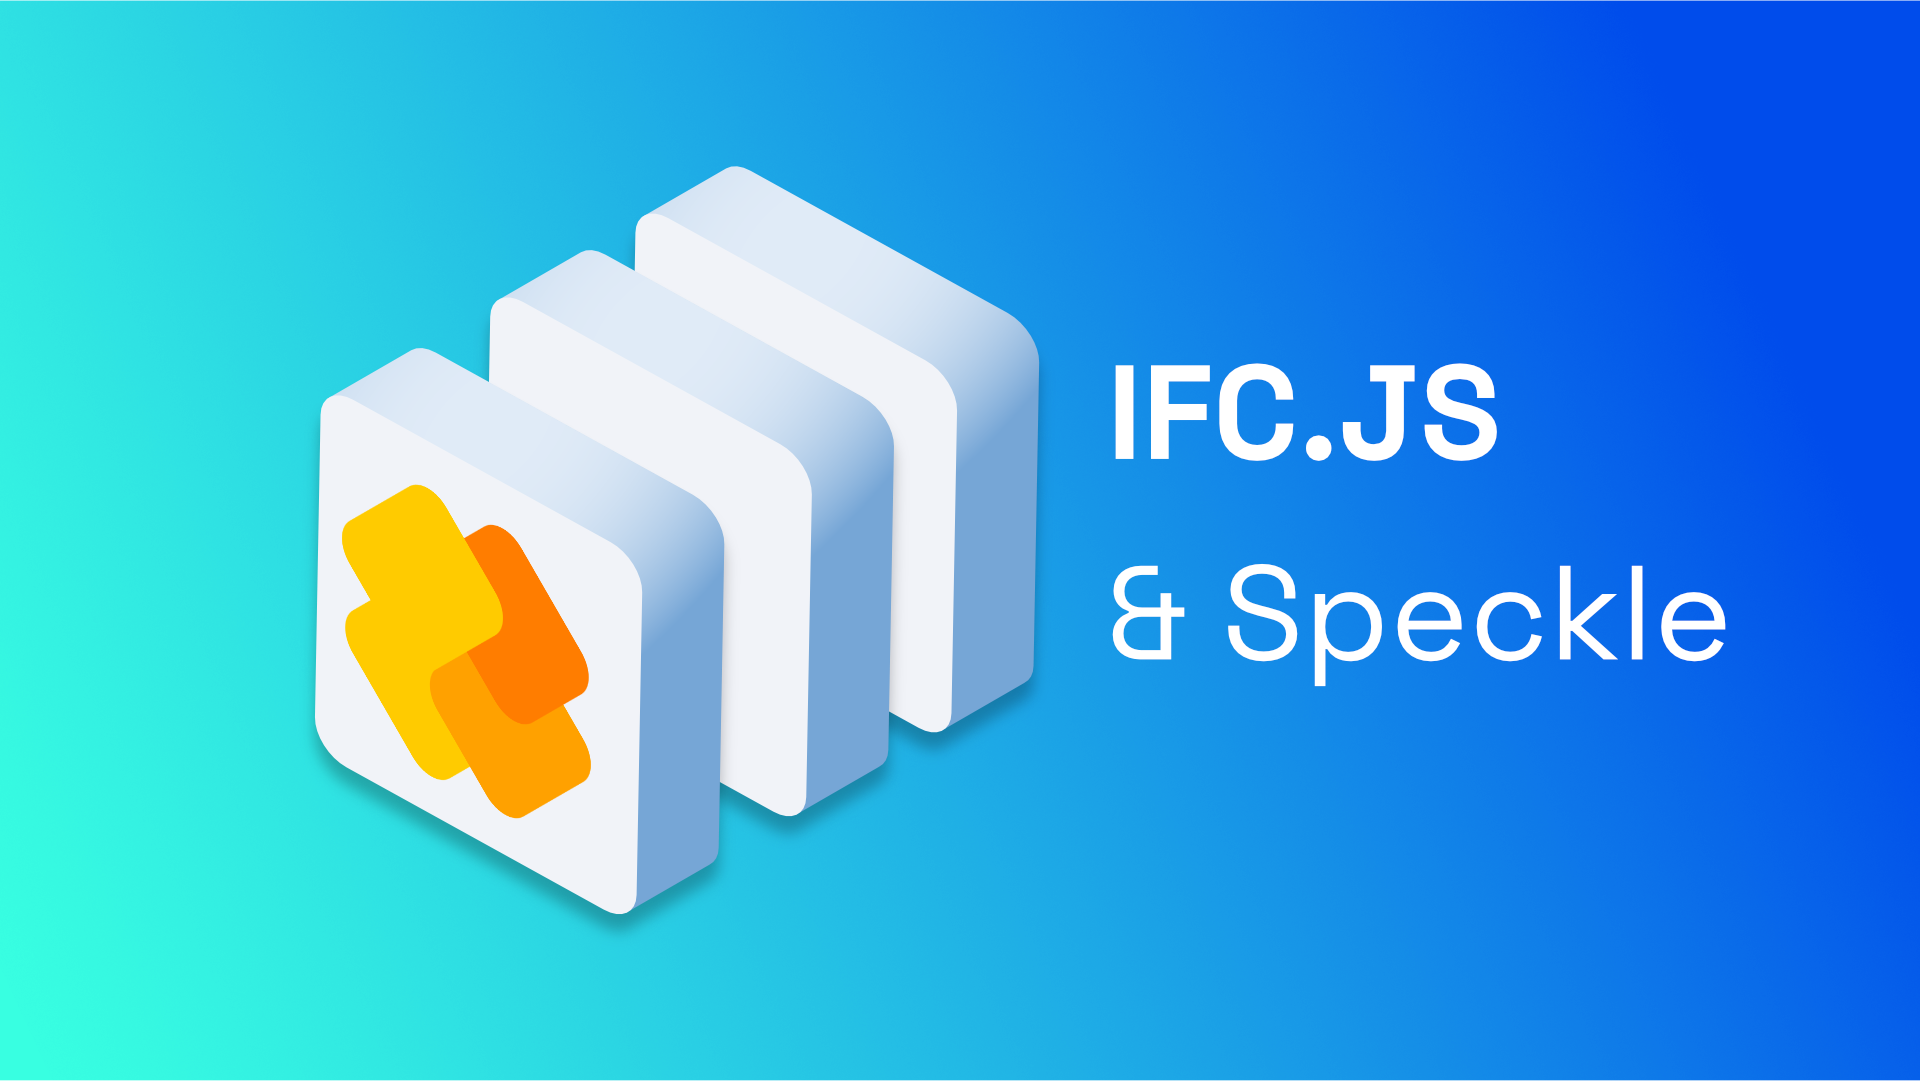 Speckle and IFC.js Team Up